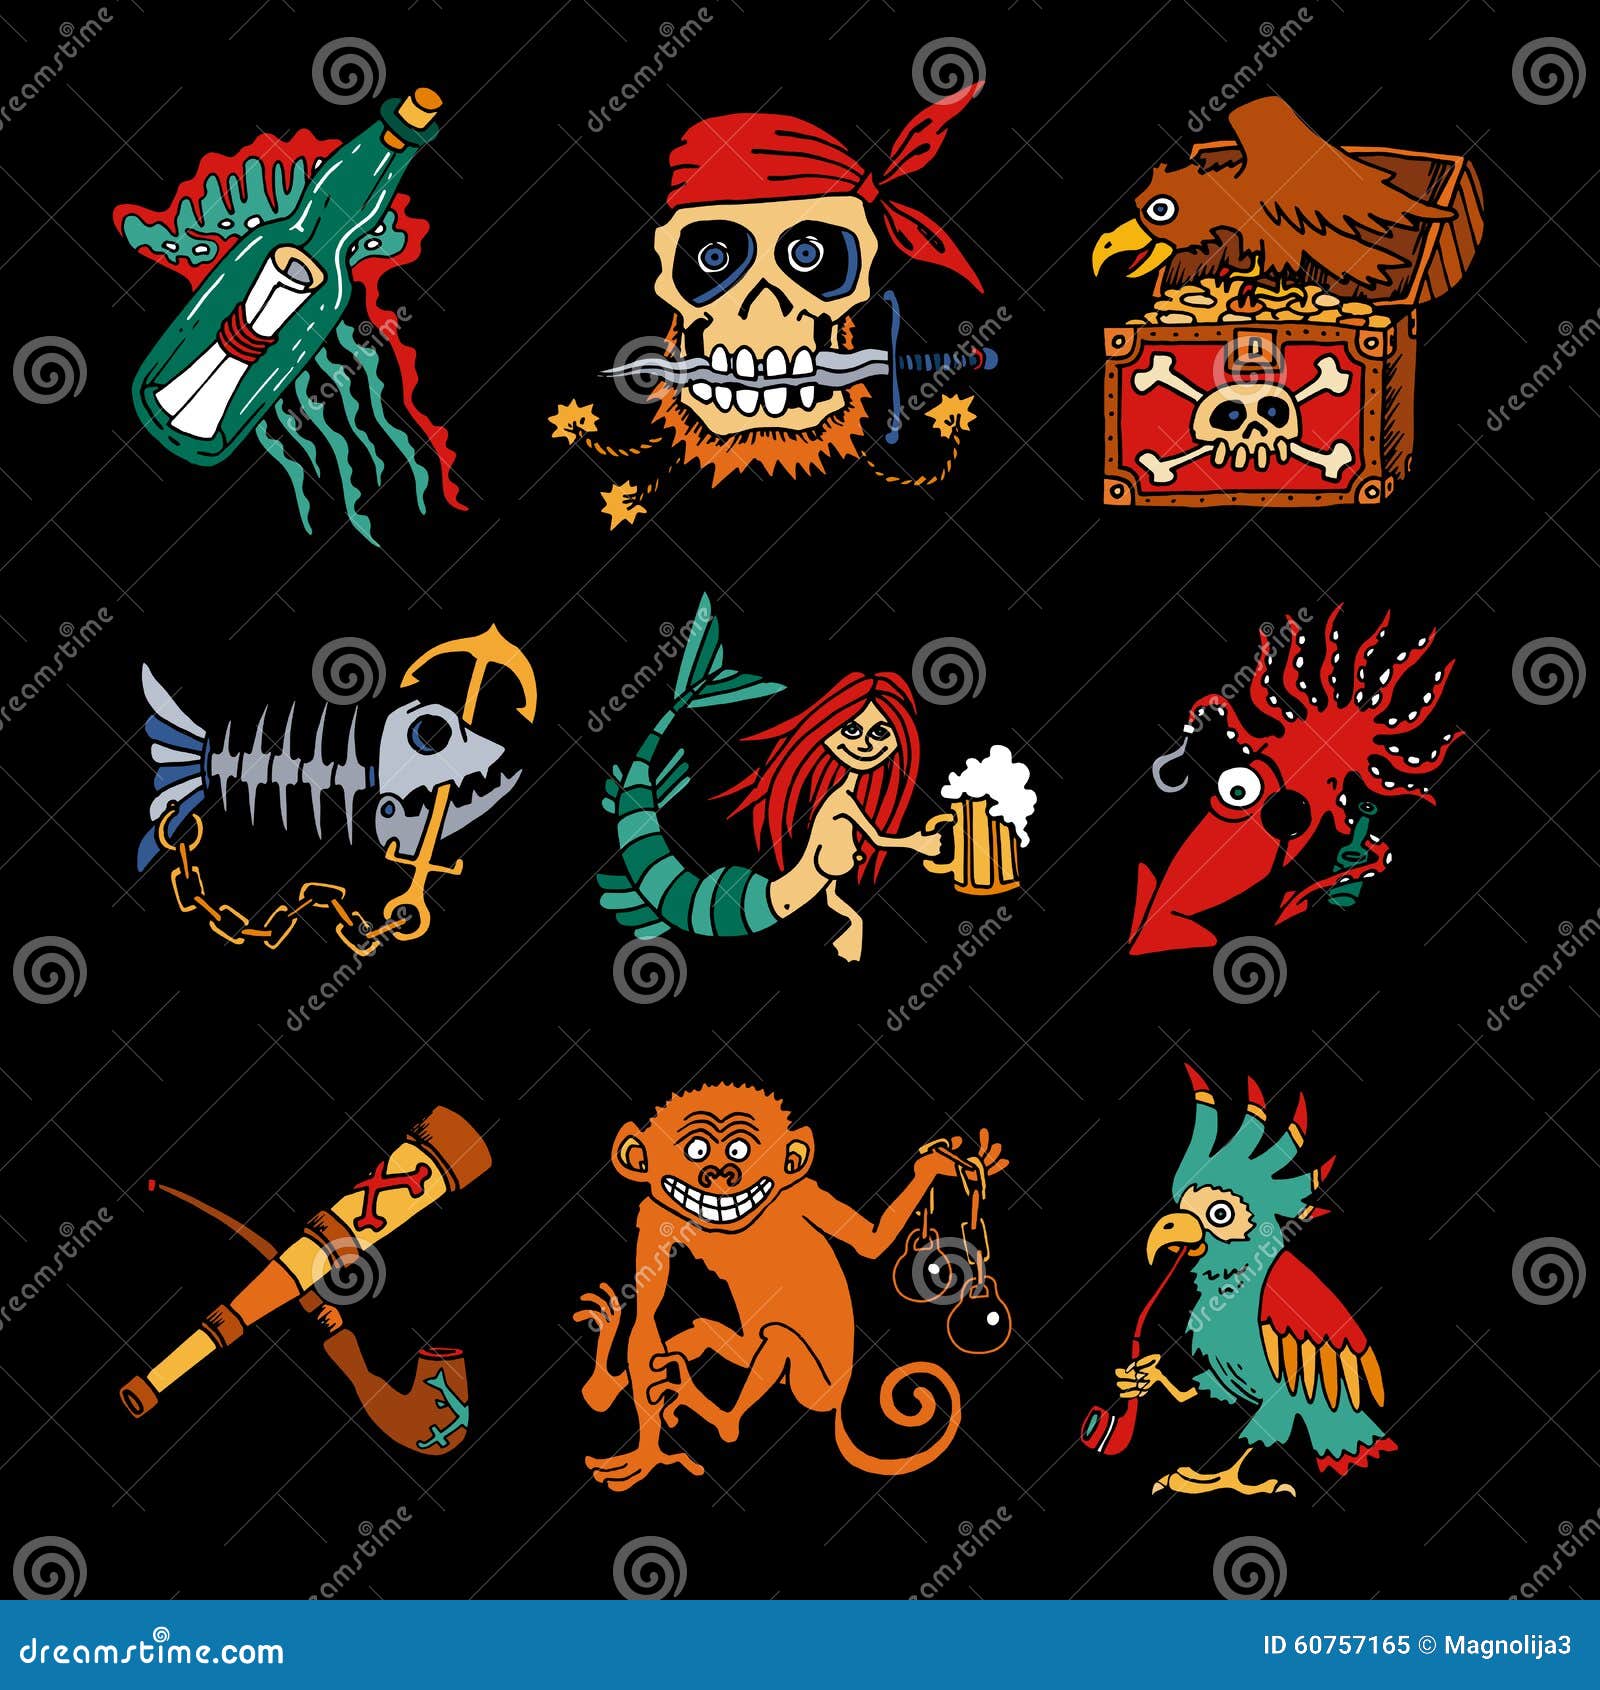 pirate legends cartoon icons on black background